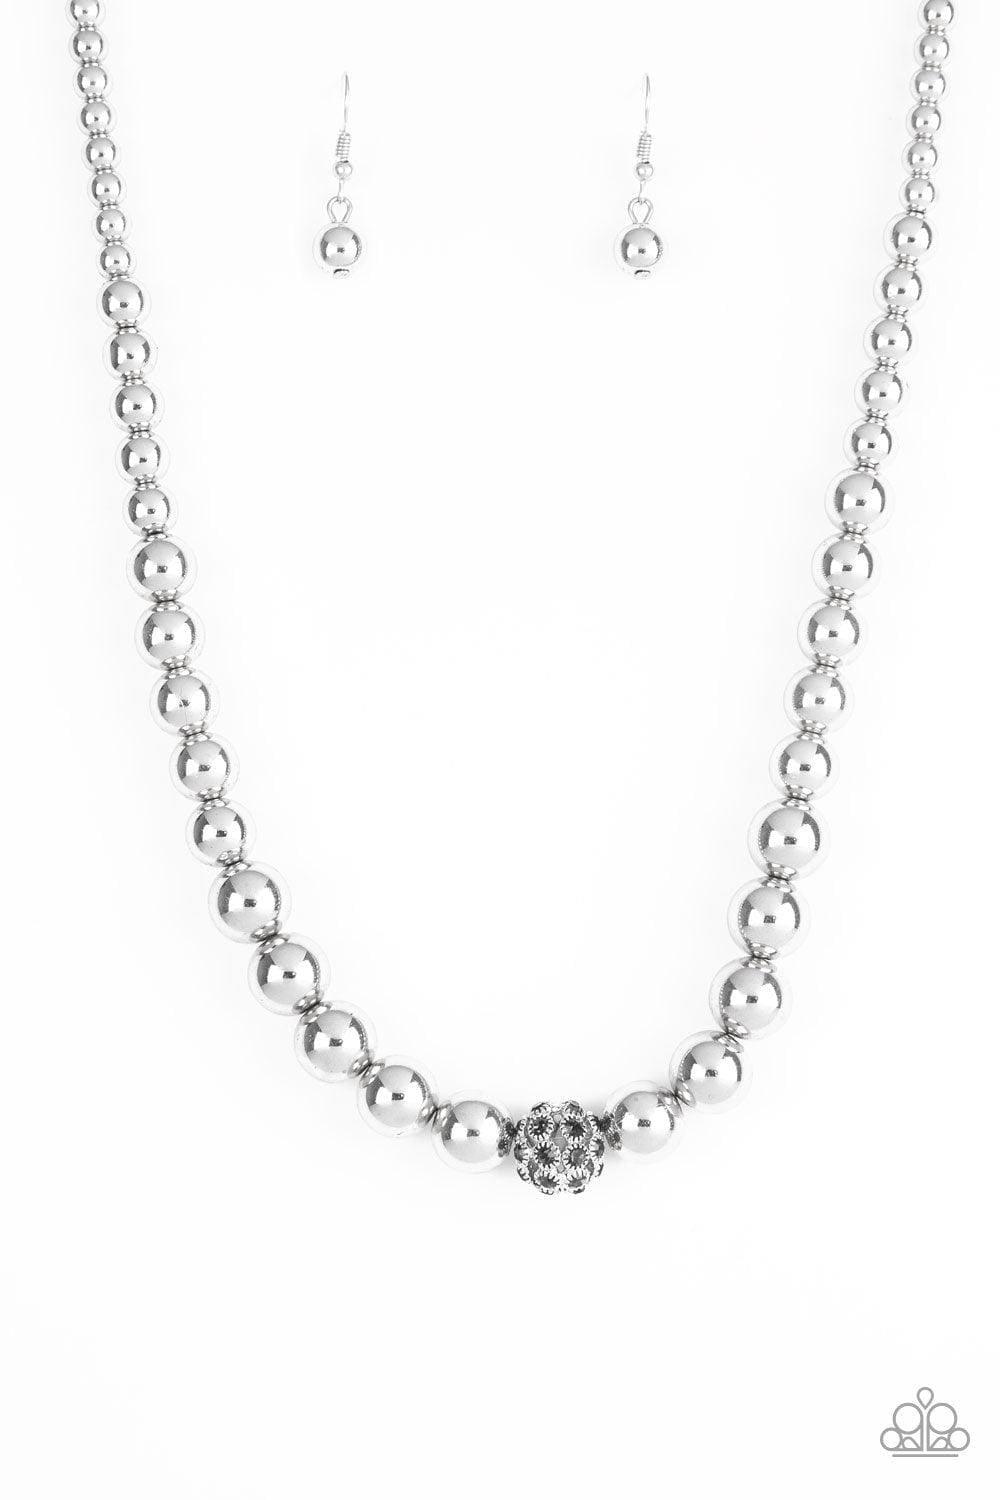 Paparazzi Accessories - High-stakes Fame - Silver Necklace - Bling by JessieK